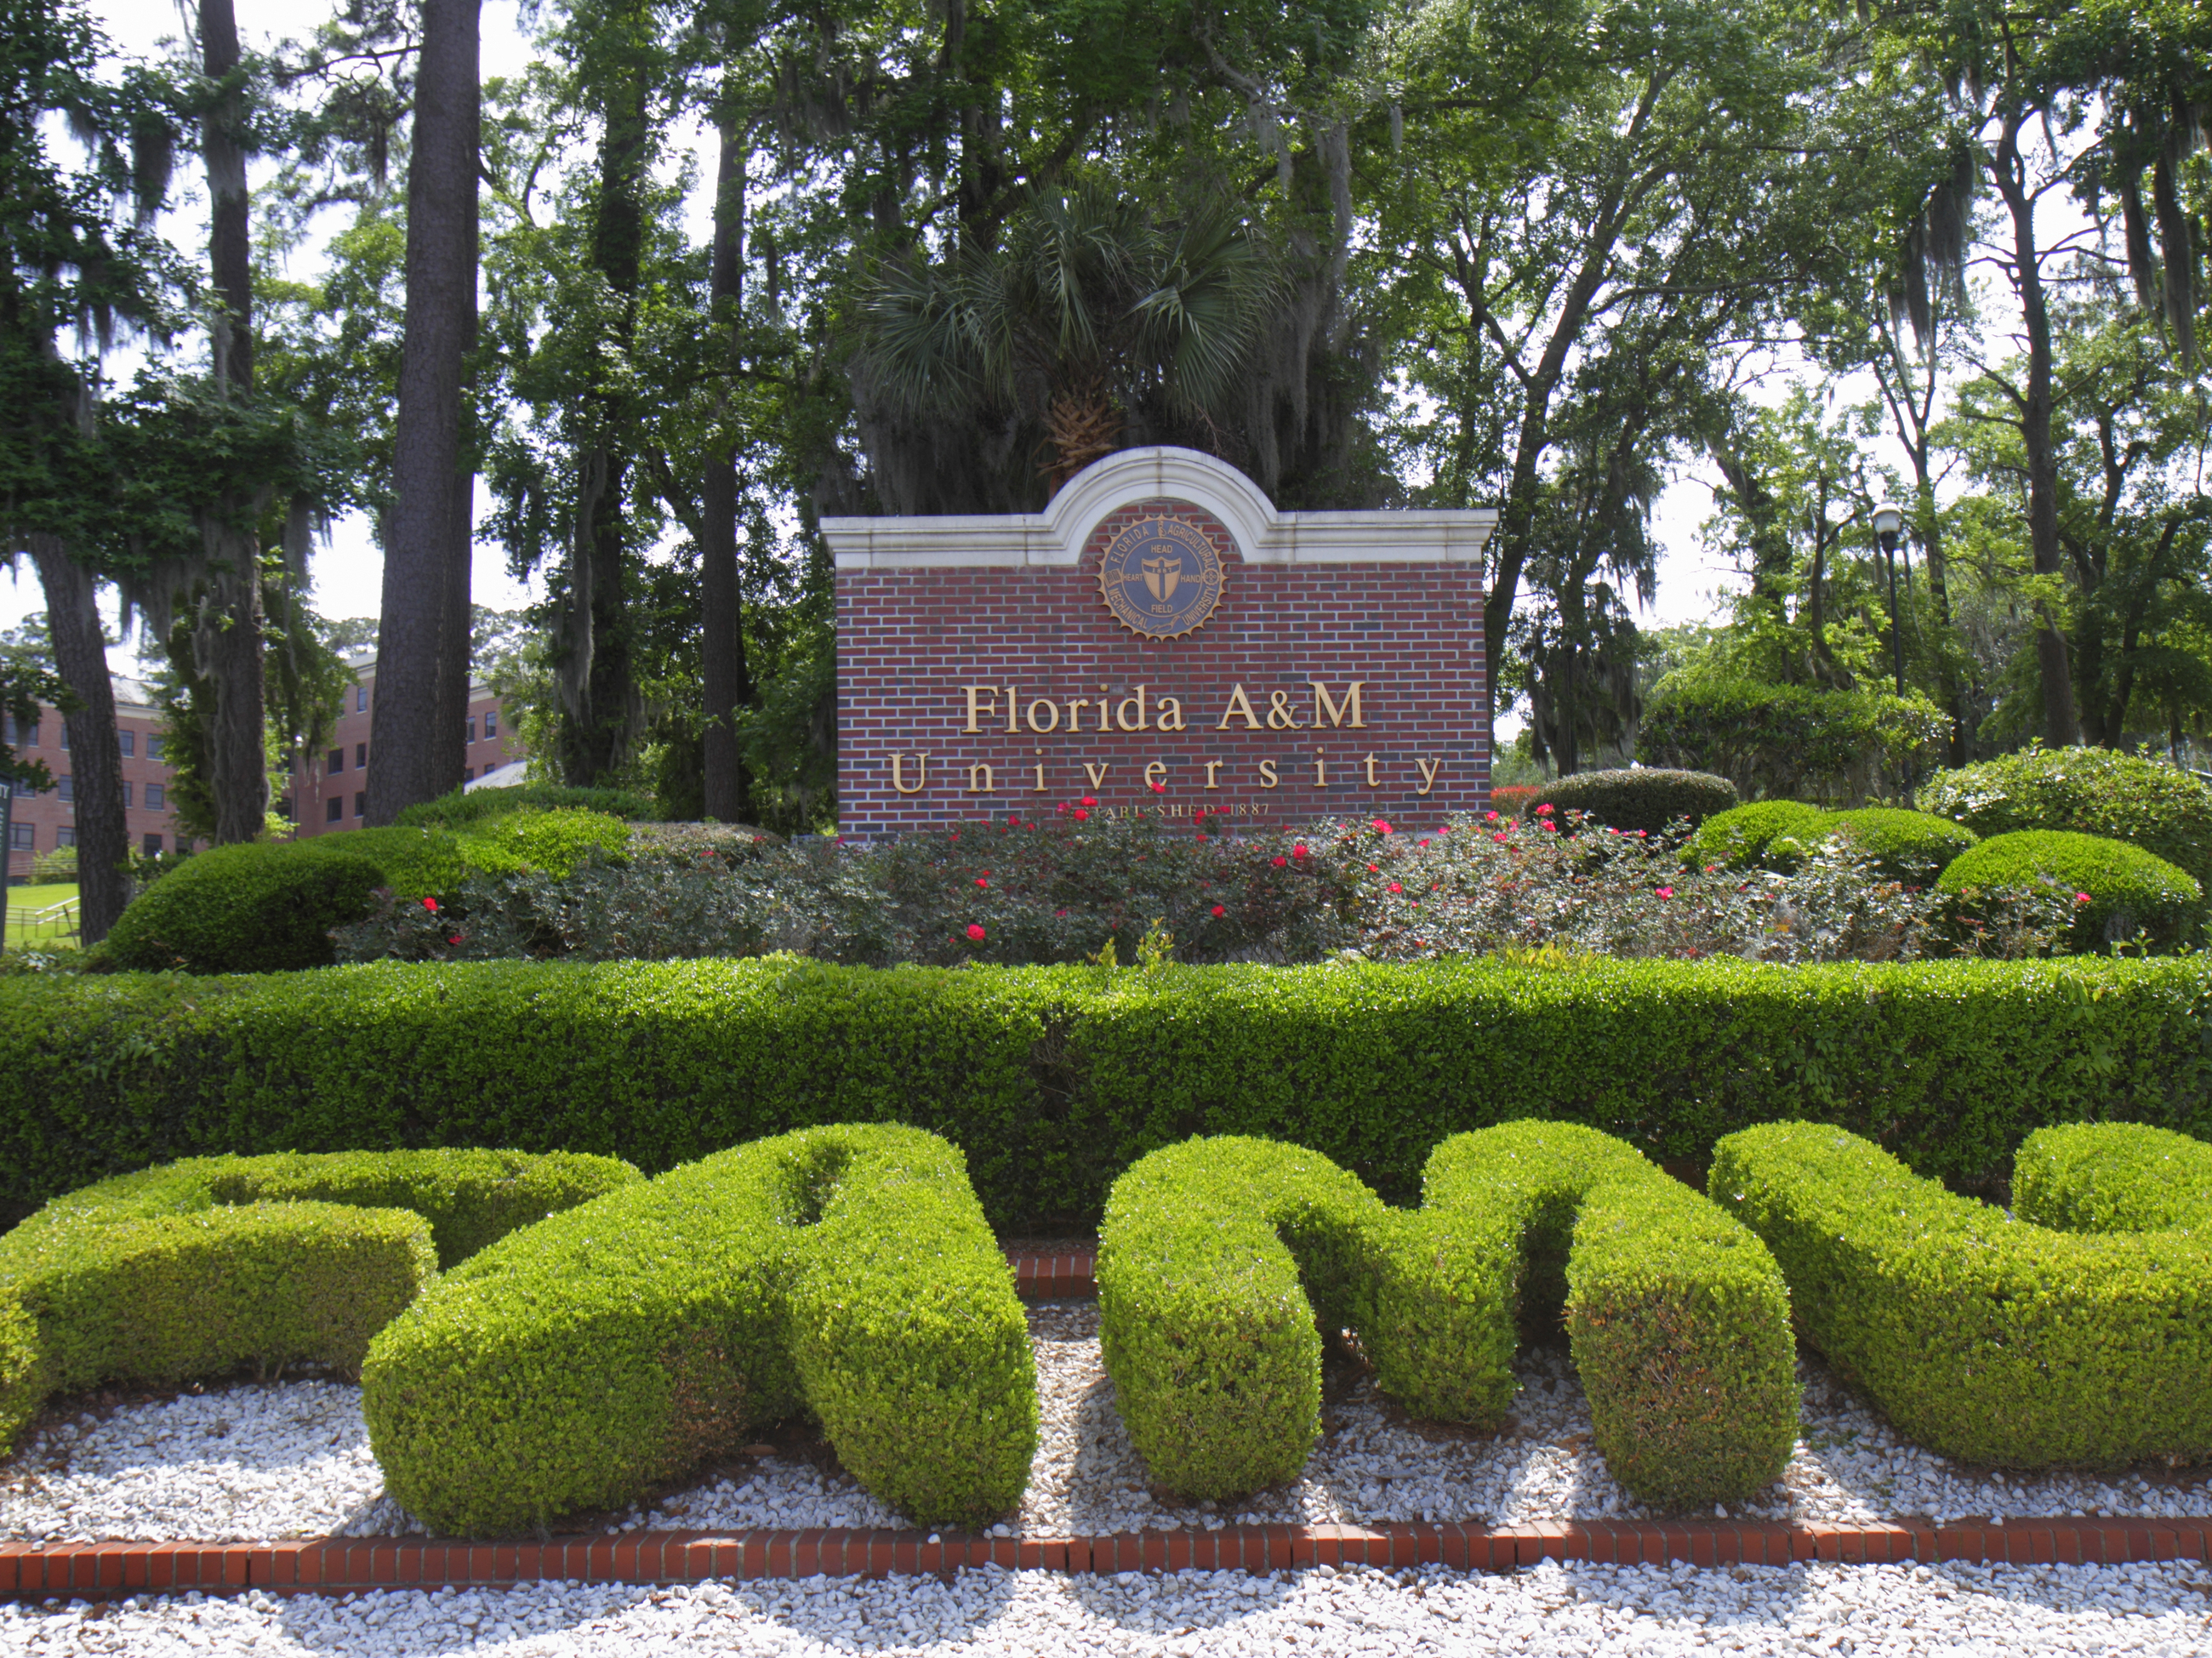 Florida A&M University announced a "transformative" donation earlier this month — but the school ceased contact with the donor after questions arose about the funds. Image shows shrubbery and landscaping around a large sign for the college in Tallahassee, Fla.